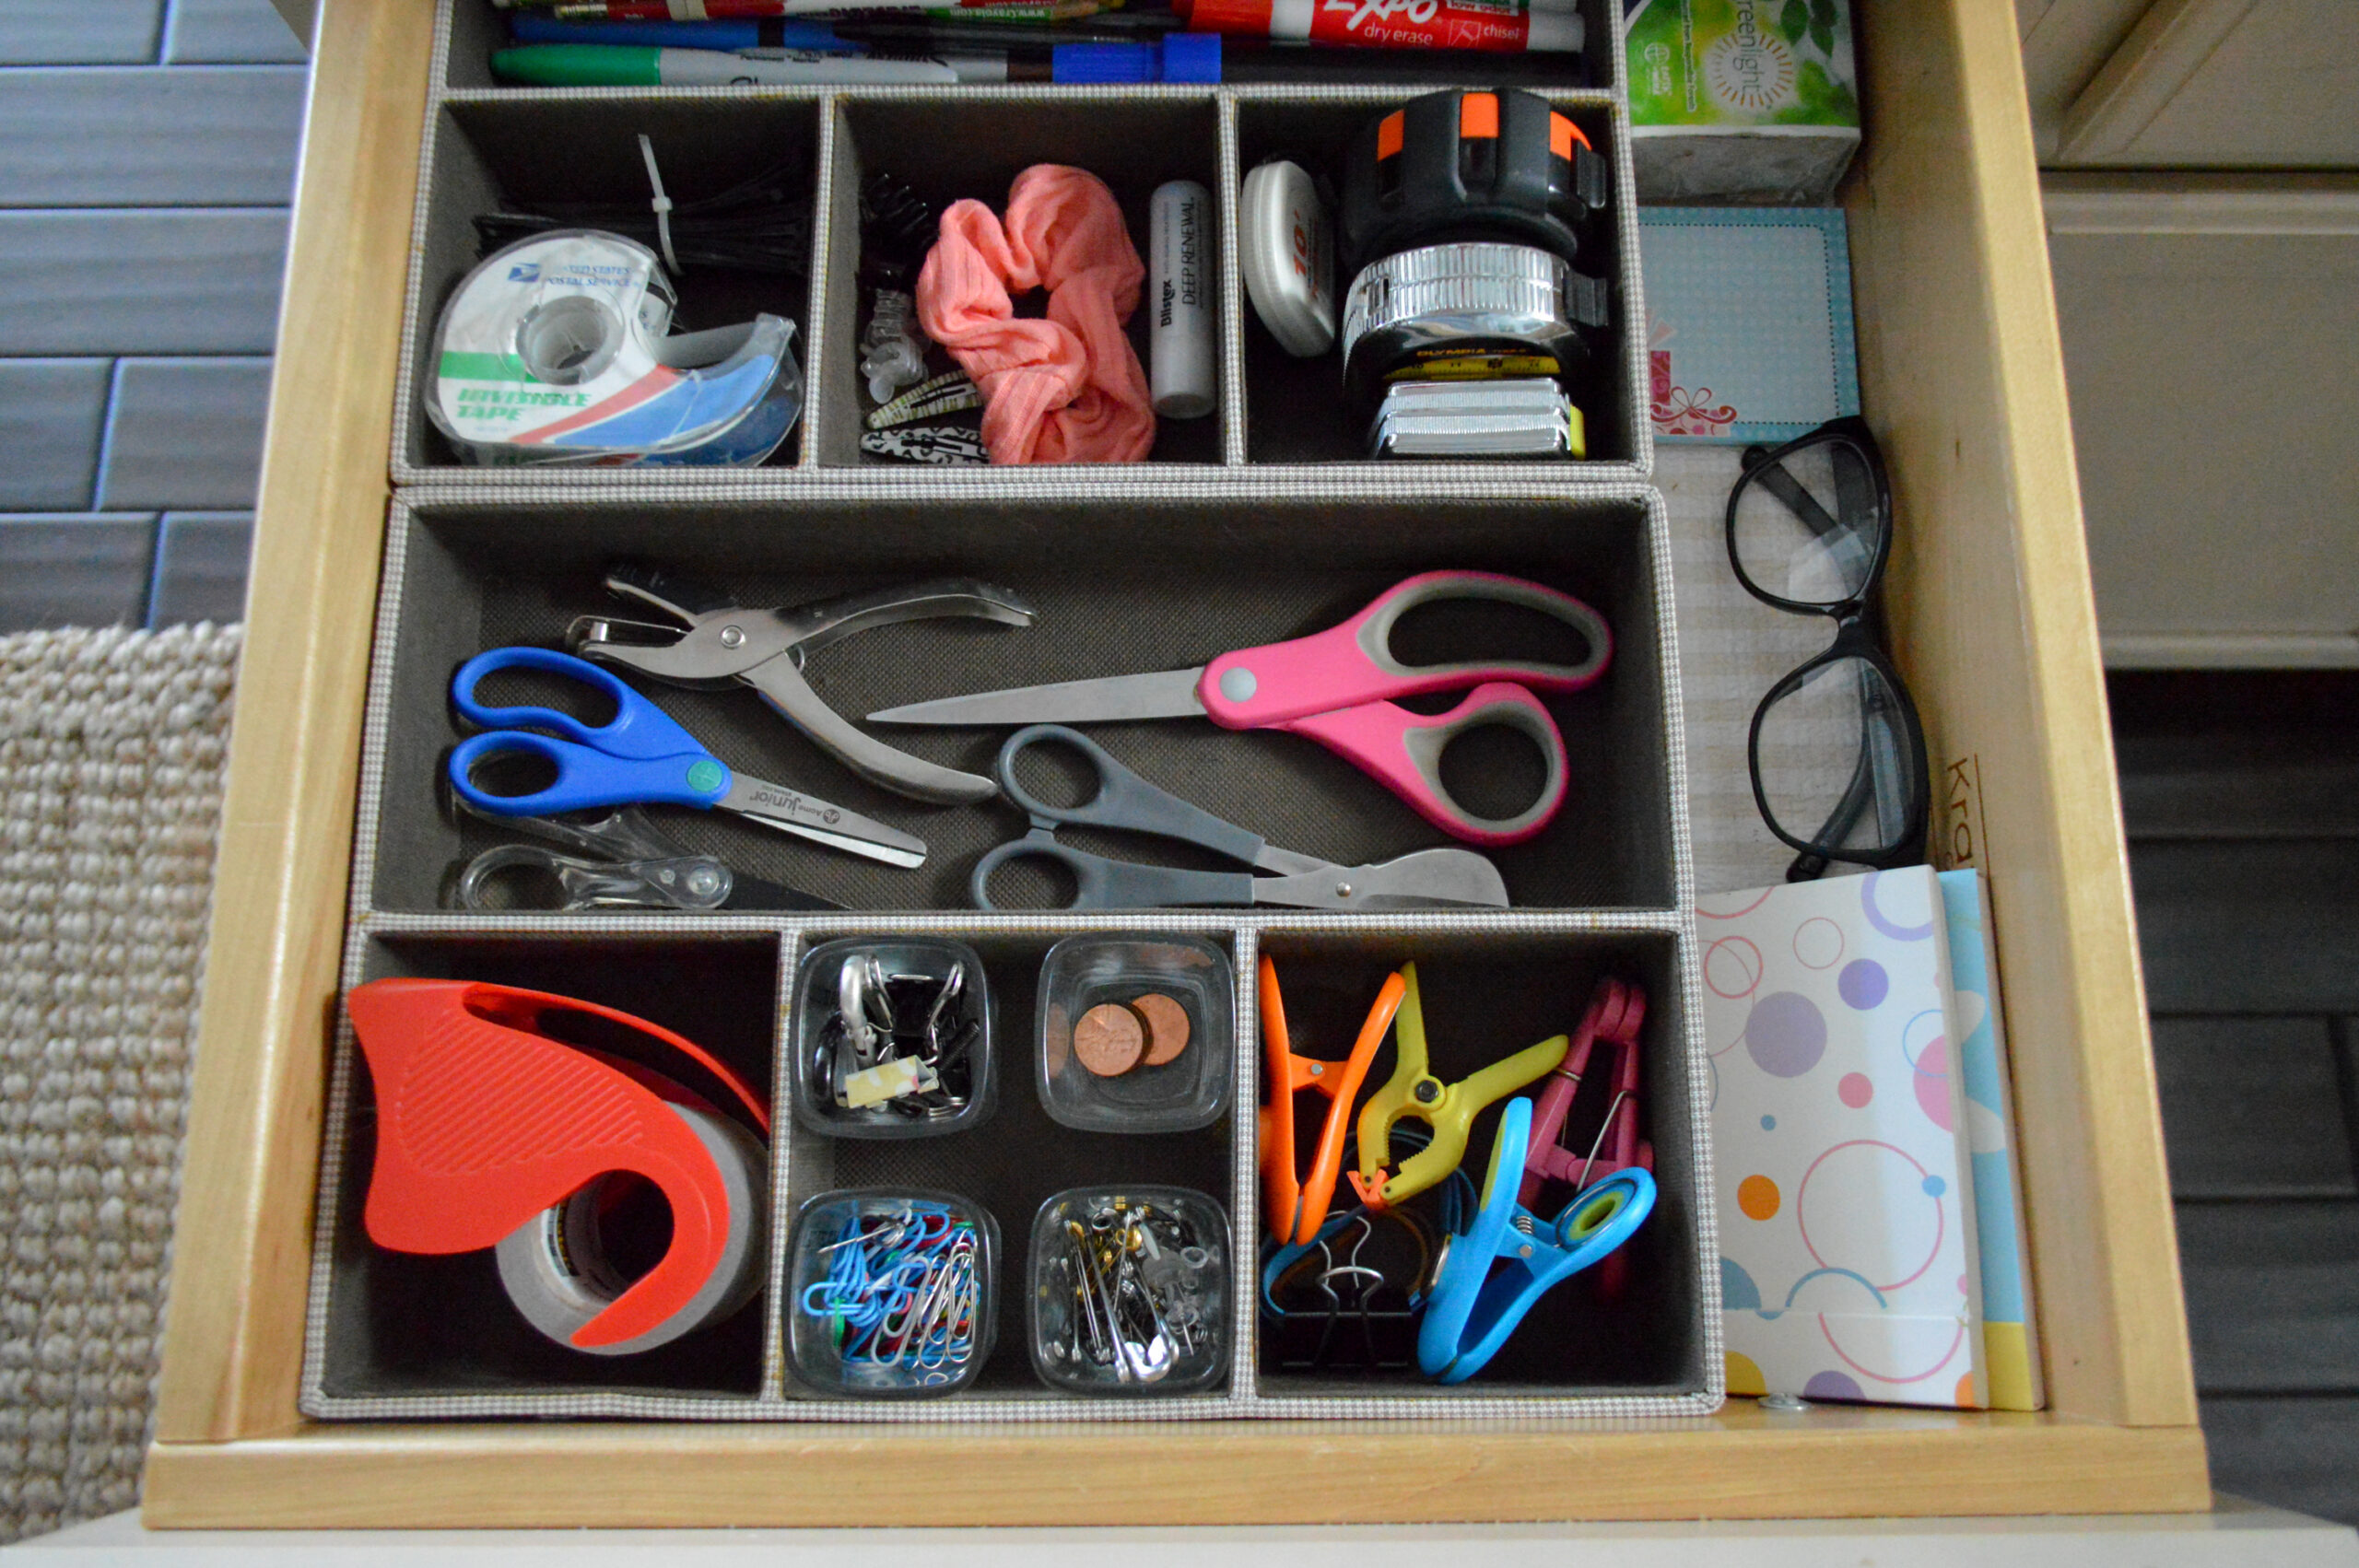 How to Actually Organize a Junk Drawer in 8 Simple Steps